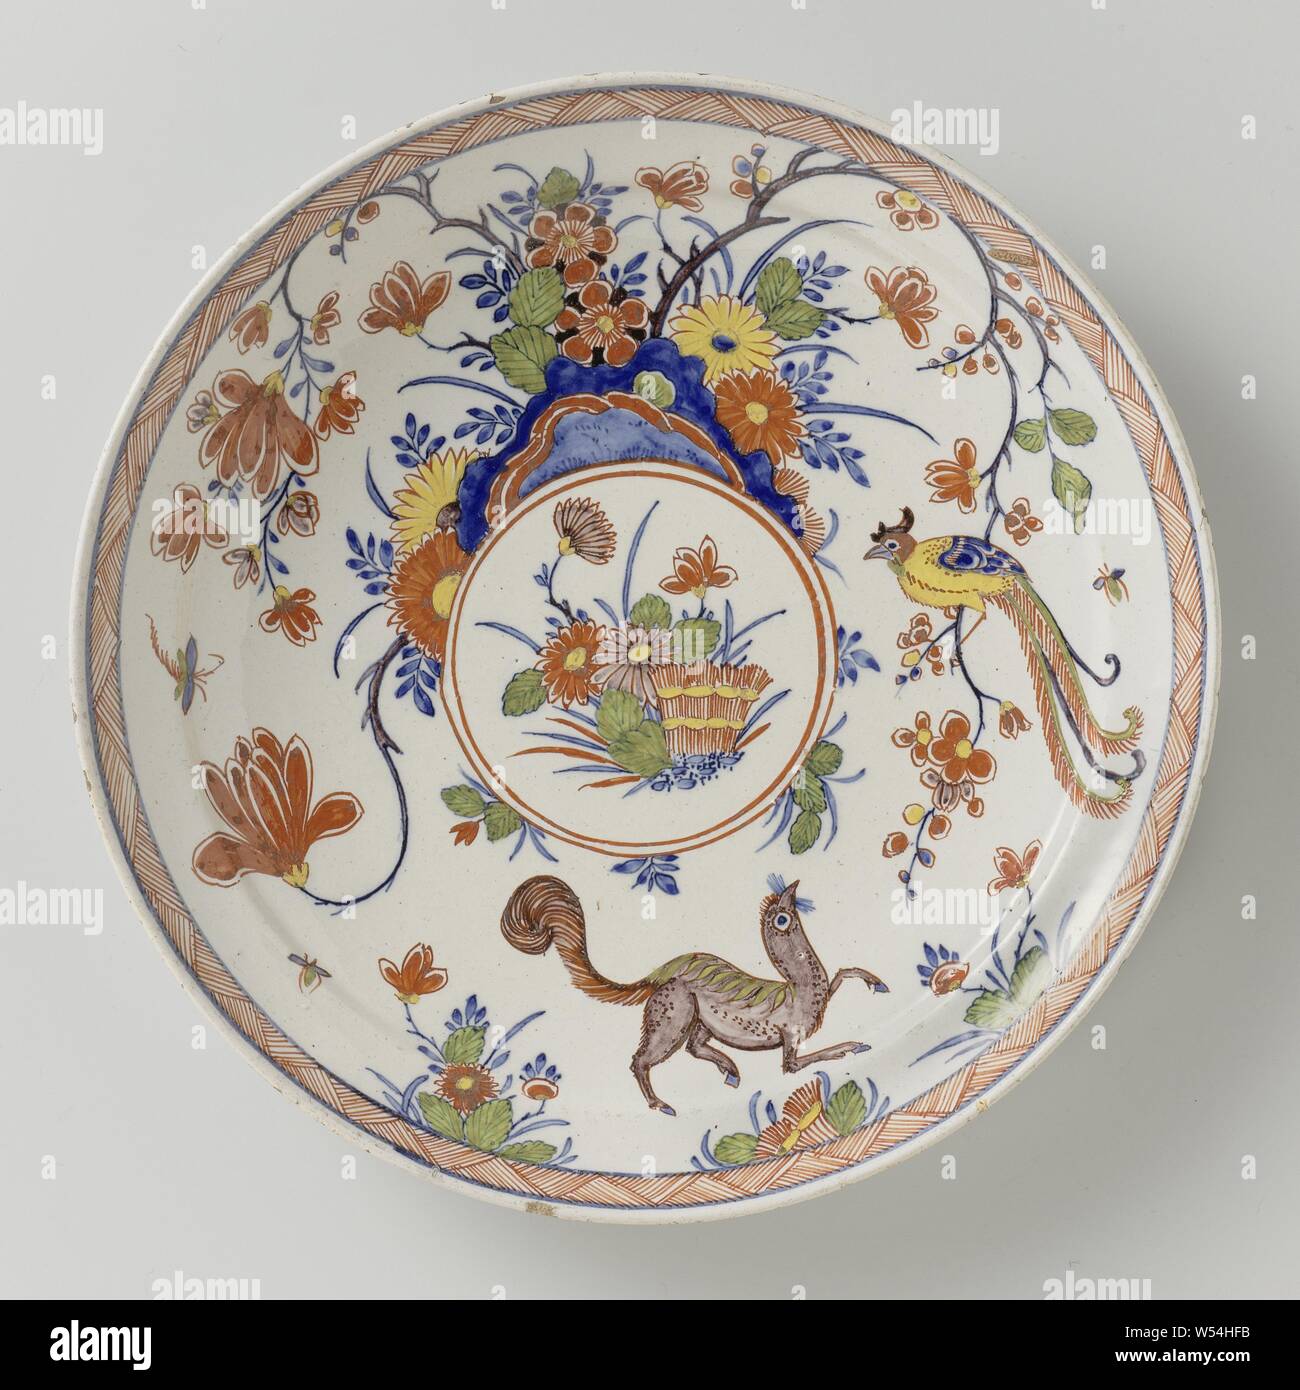 Plate, Plate of faience. Multicolored painted after Japanese Kakiemon example., anonymous, Delft, 1710 - 1740, d 22.8 cm × h 3.0 cm Stock Photo